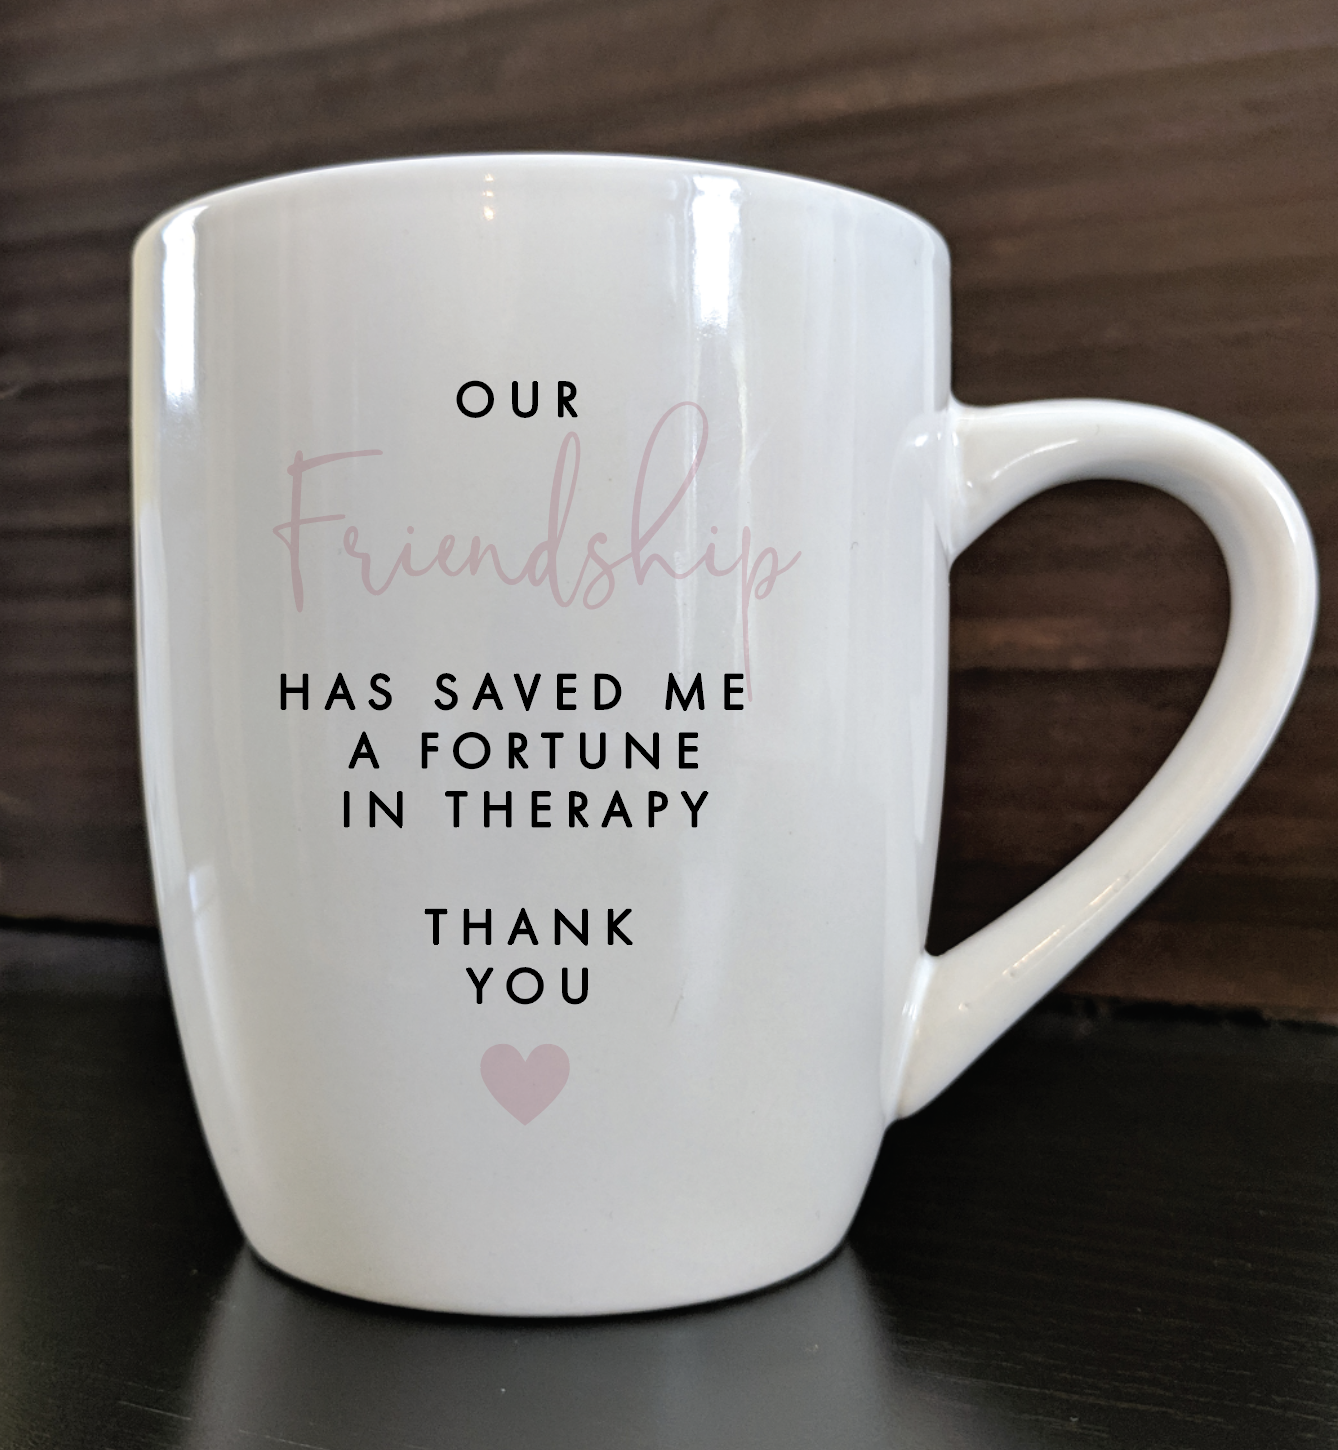 Ceramic Mug - OUR FRIENDSHIP HAS SAVED ME A FORTUNE IN